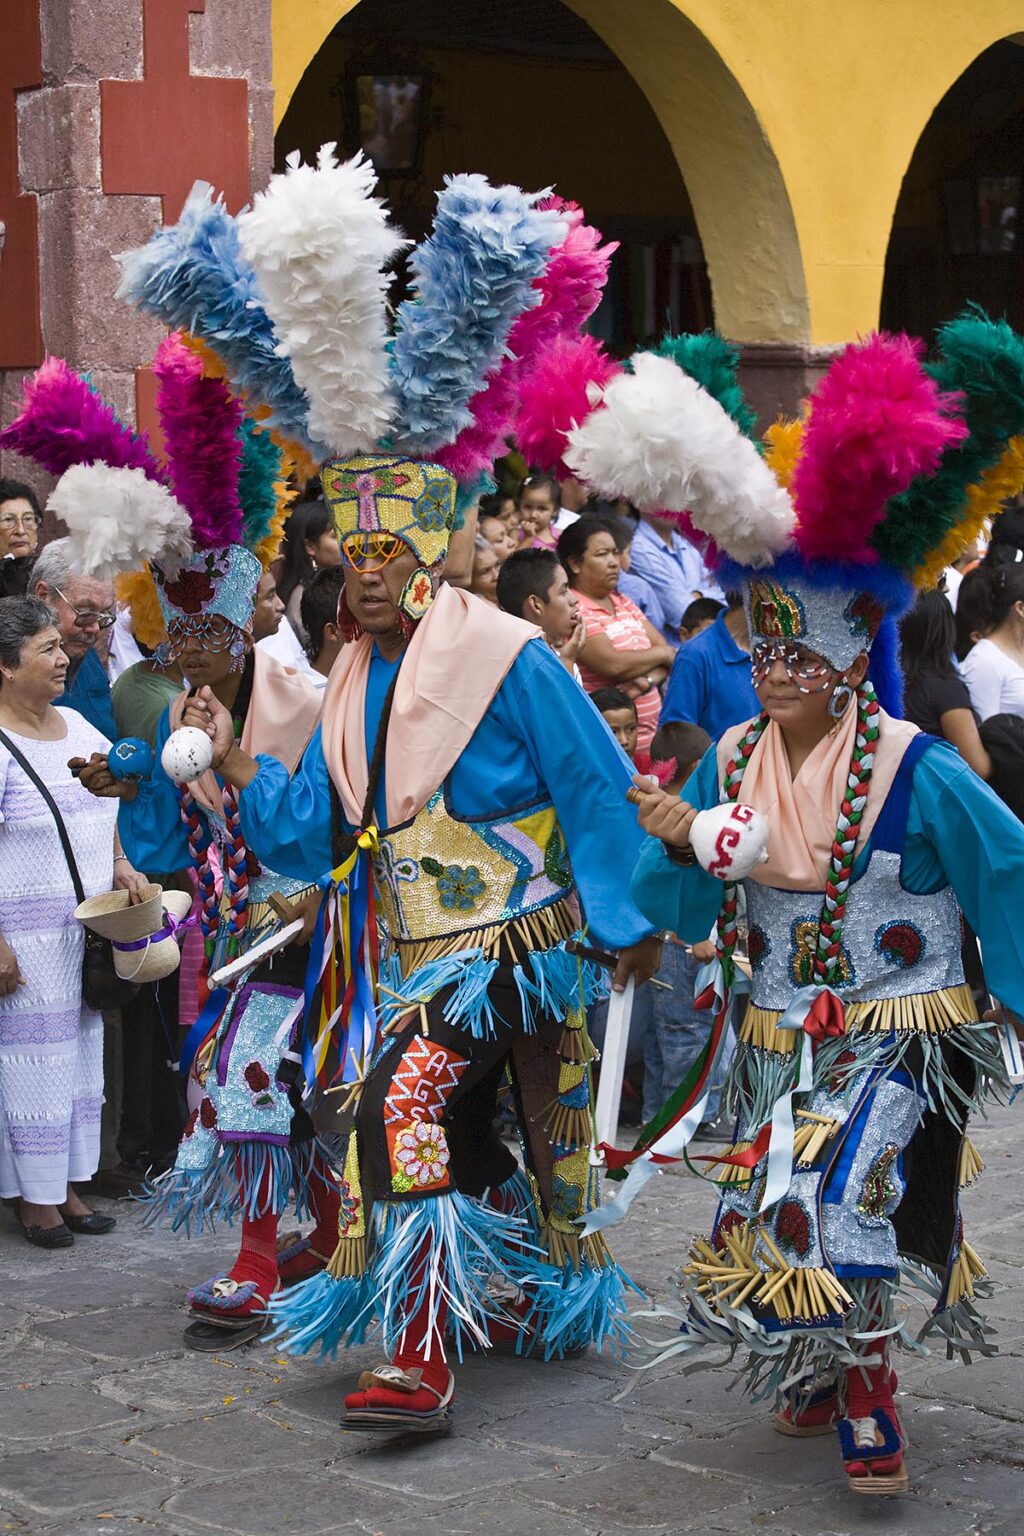 Dance troupes come from all parts of Mexico representing their tribe in the annual INDEPENDENCE DAY PARADE in September - SAN MIGUEL DE ALLENDE, MEXICO